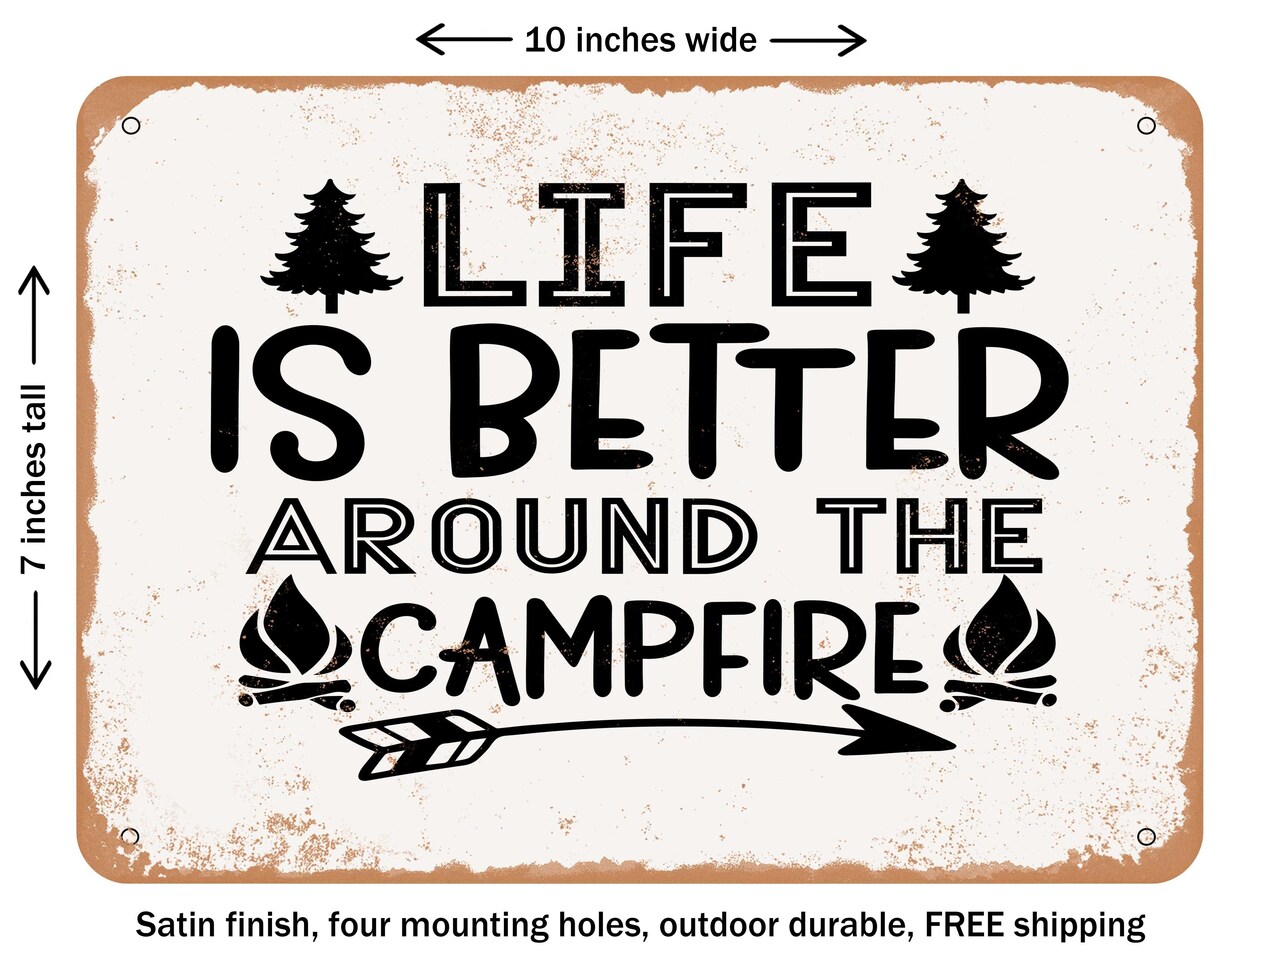 DECORATIVE METAL SIGN - Life is Better Around the Campfire - 2 - Vintage Rusty Look